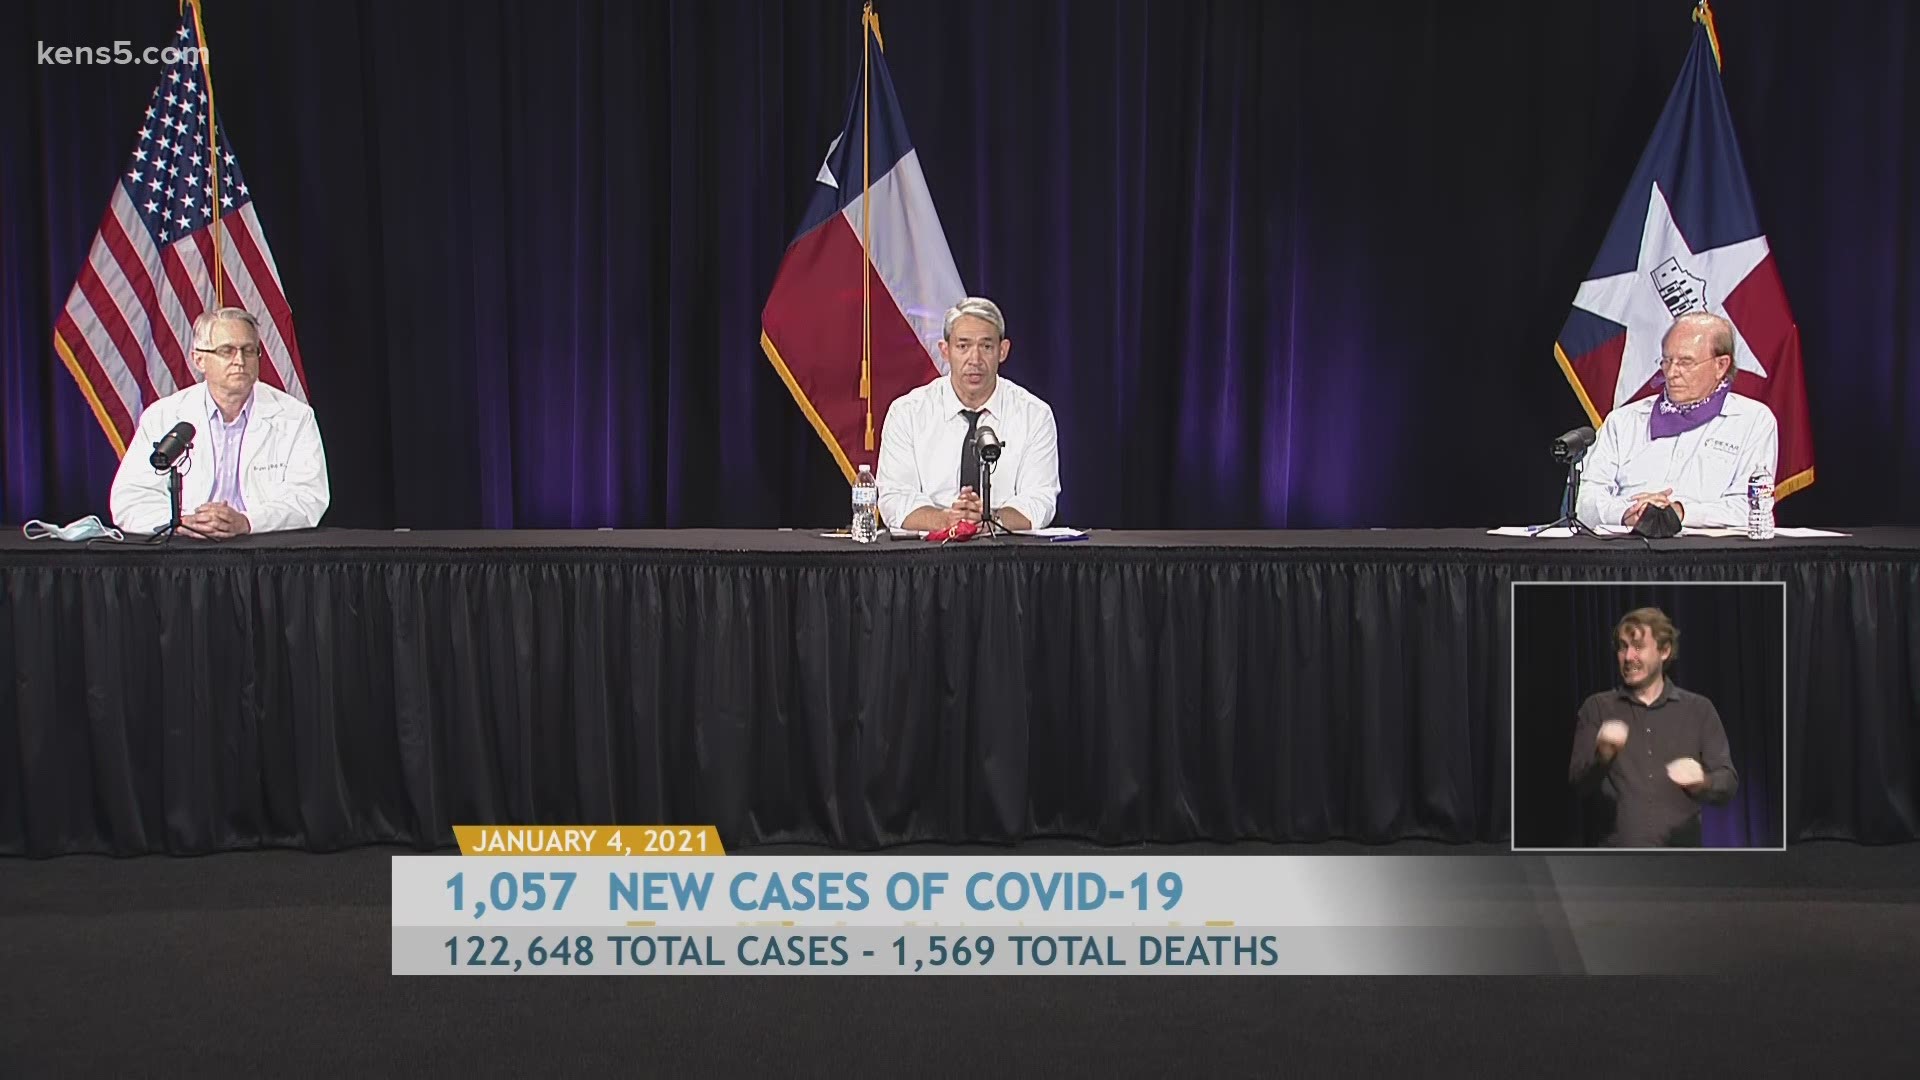 Mayor Nirenberg reported 1,057 new cases, bringing the total to 122,648 . There are 7 new deaths reported, so the death toll for Bexar County is now at 1,569.